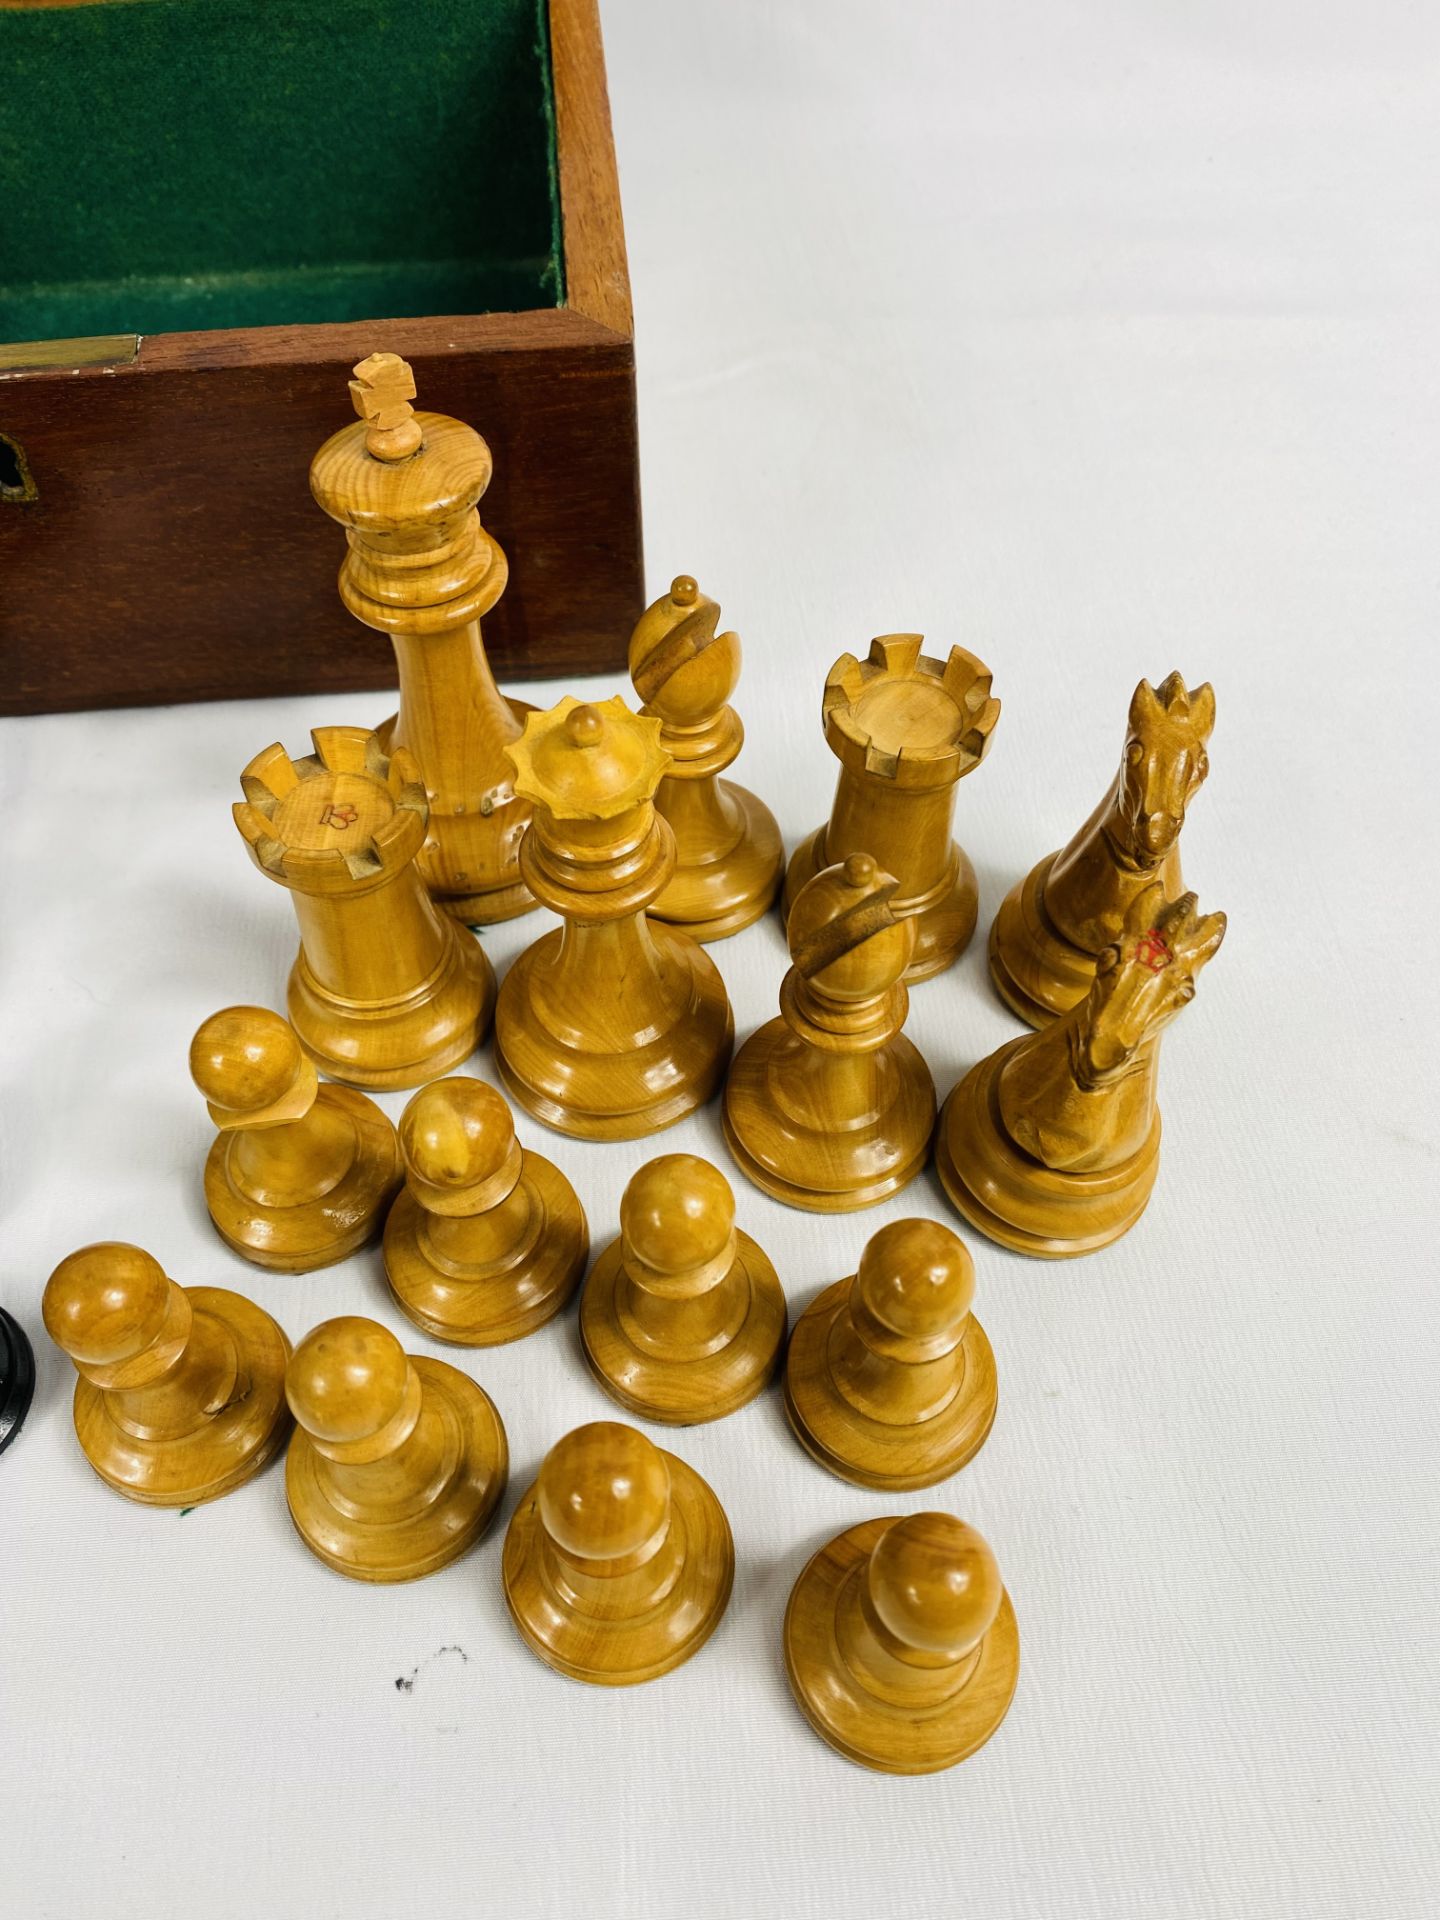 Jacques and Son Staunton style chess set - Image 5 of 6